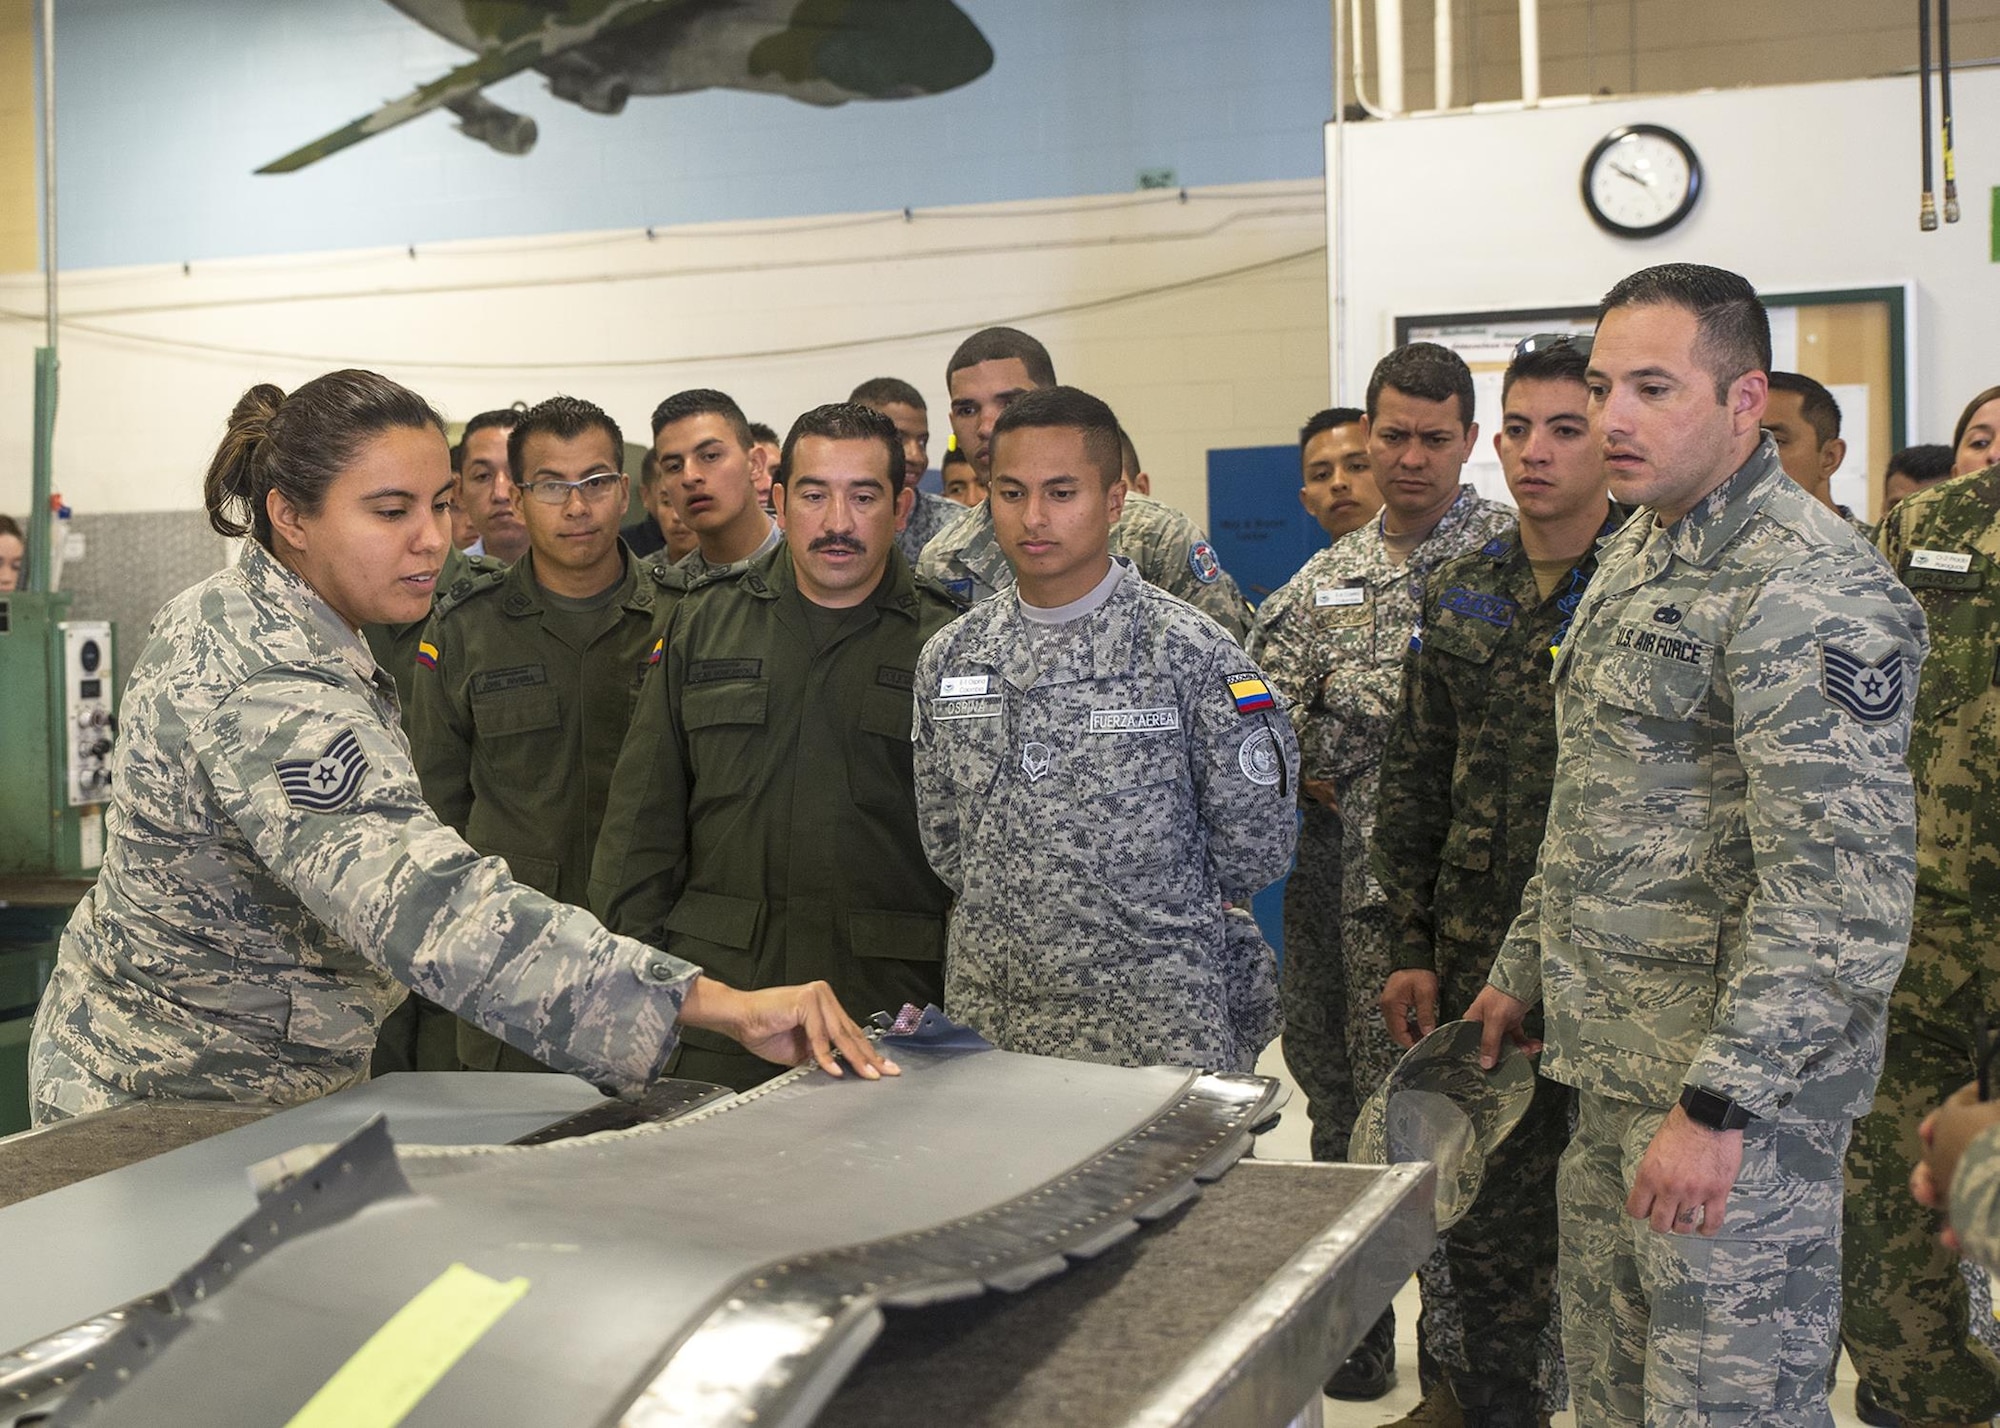 Tech. Sgt. Stephanie Rymers, a 433rd Maintenance Squadron sheet metal mechanic, shows students from the Inter-American Air Forces Academy a damaged piece metal from a C-5M Super Galaxy aircraft  March 29, 2017 at Joint Base San Antonio-Lackland, Texas. As part of their tour the students toured a C-5M Super Galaxy aircraft and visited the structural, metals, and survival shops. (U.S. Air Force photo by Benjamin Faske)